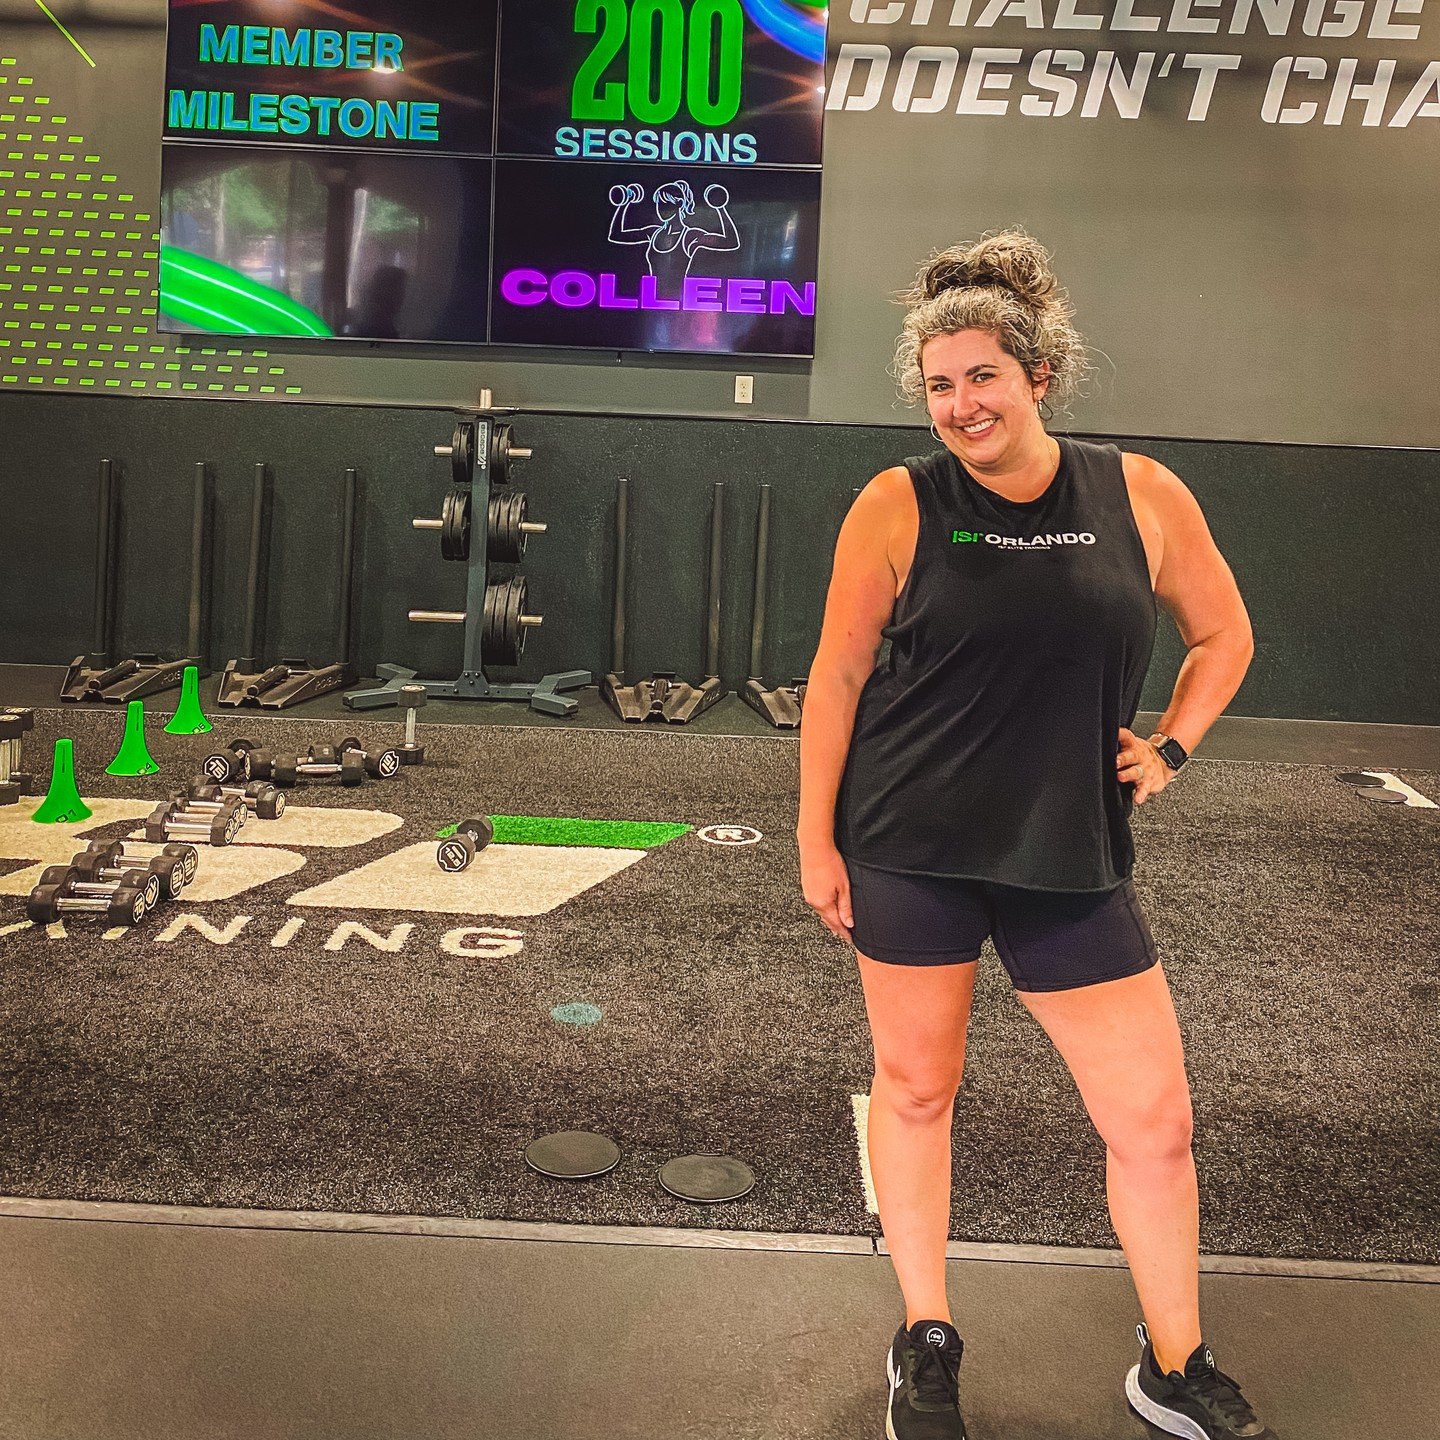 200 sessions at ISI Orlando, and I'm still the same chubby mom from the burbs... but with a few surprises! 🏋️&zwj;♀️ Who knew I had abs hiding in there? Or that I could lift heavier than my grocery bags? 💪 Shoutout to the amazing trainers who toler